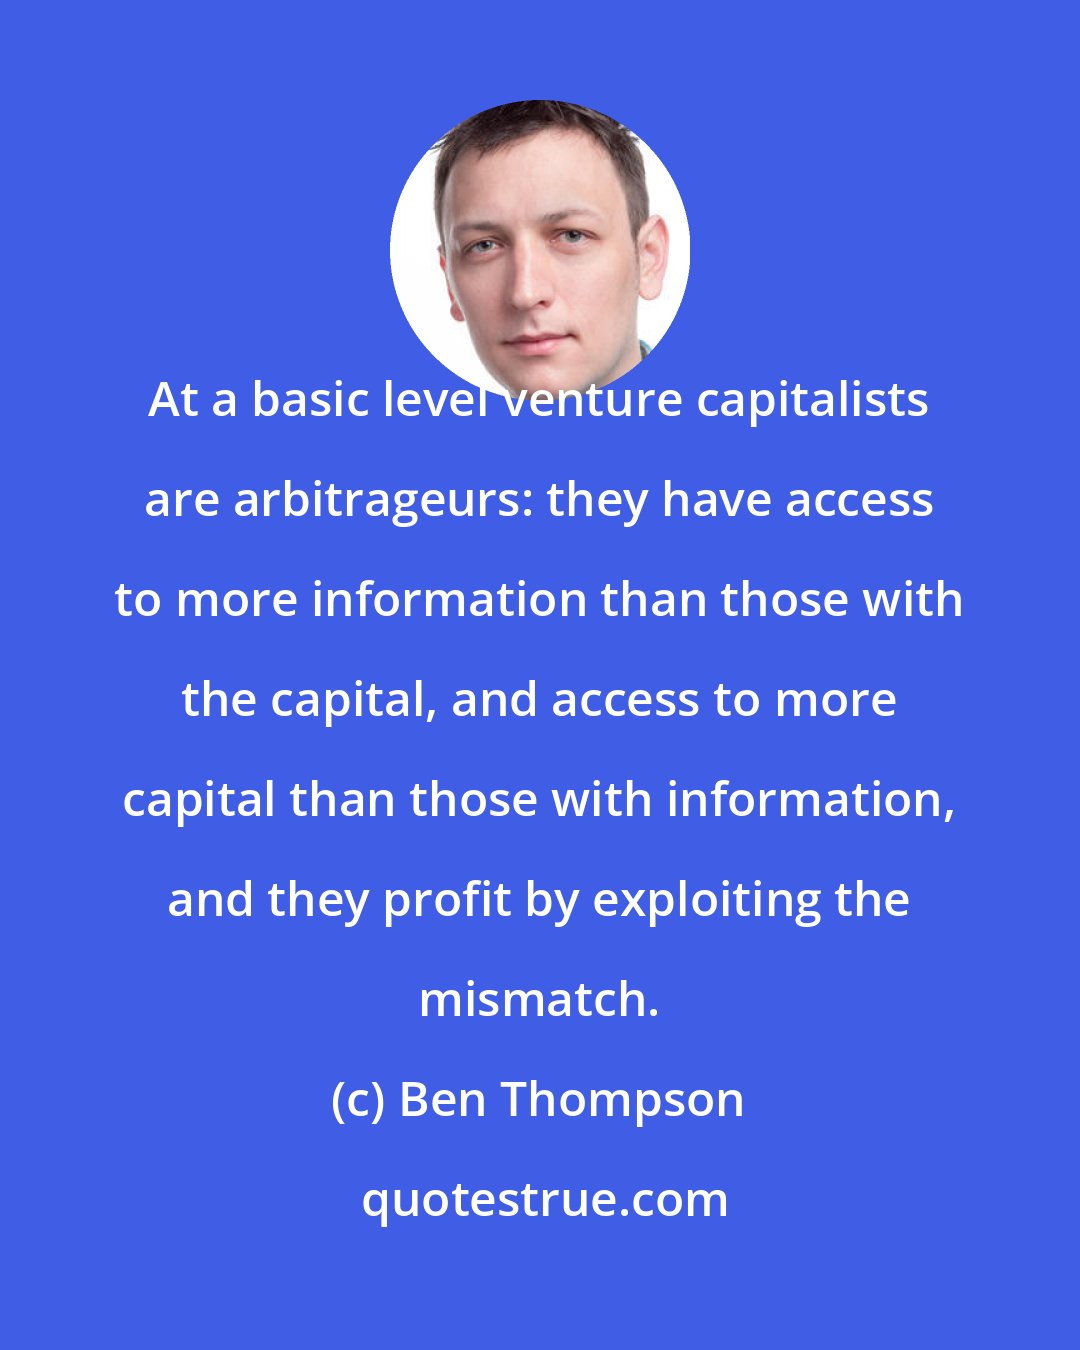 Ben Thompson: At a basic level venture capitalists are arbitrageurs: they have access to more information than those with the capital, and access to more capital than those with information, and they profit by exploiting the mismatch.